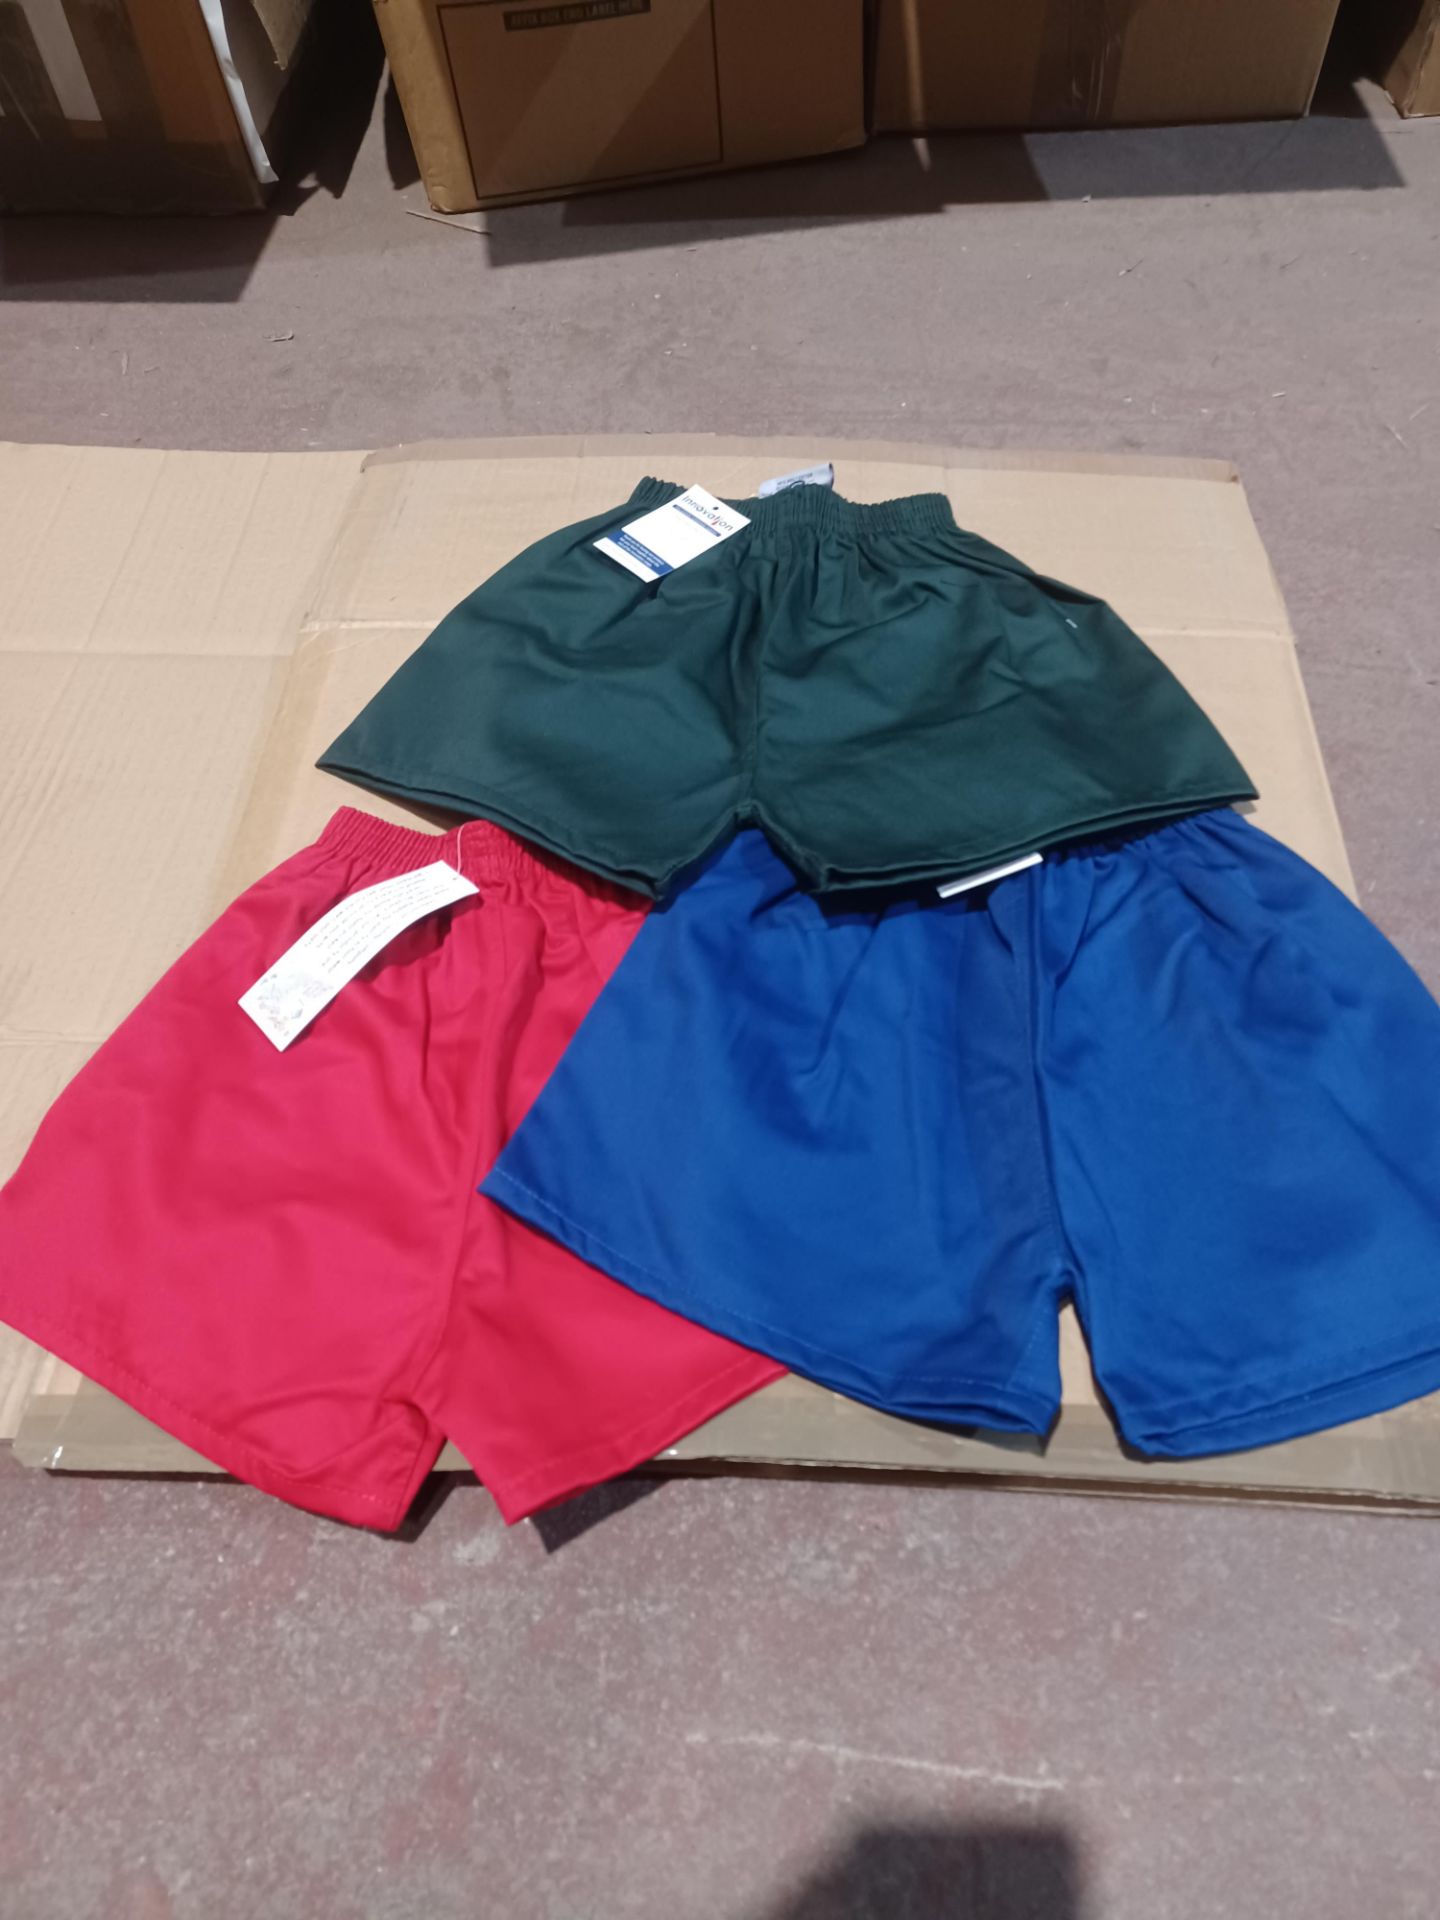 108 x Packaged Innovation Cotton Shorts in Various Sizes and Colours. RRP £12.12 each - R14